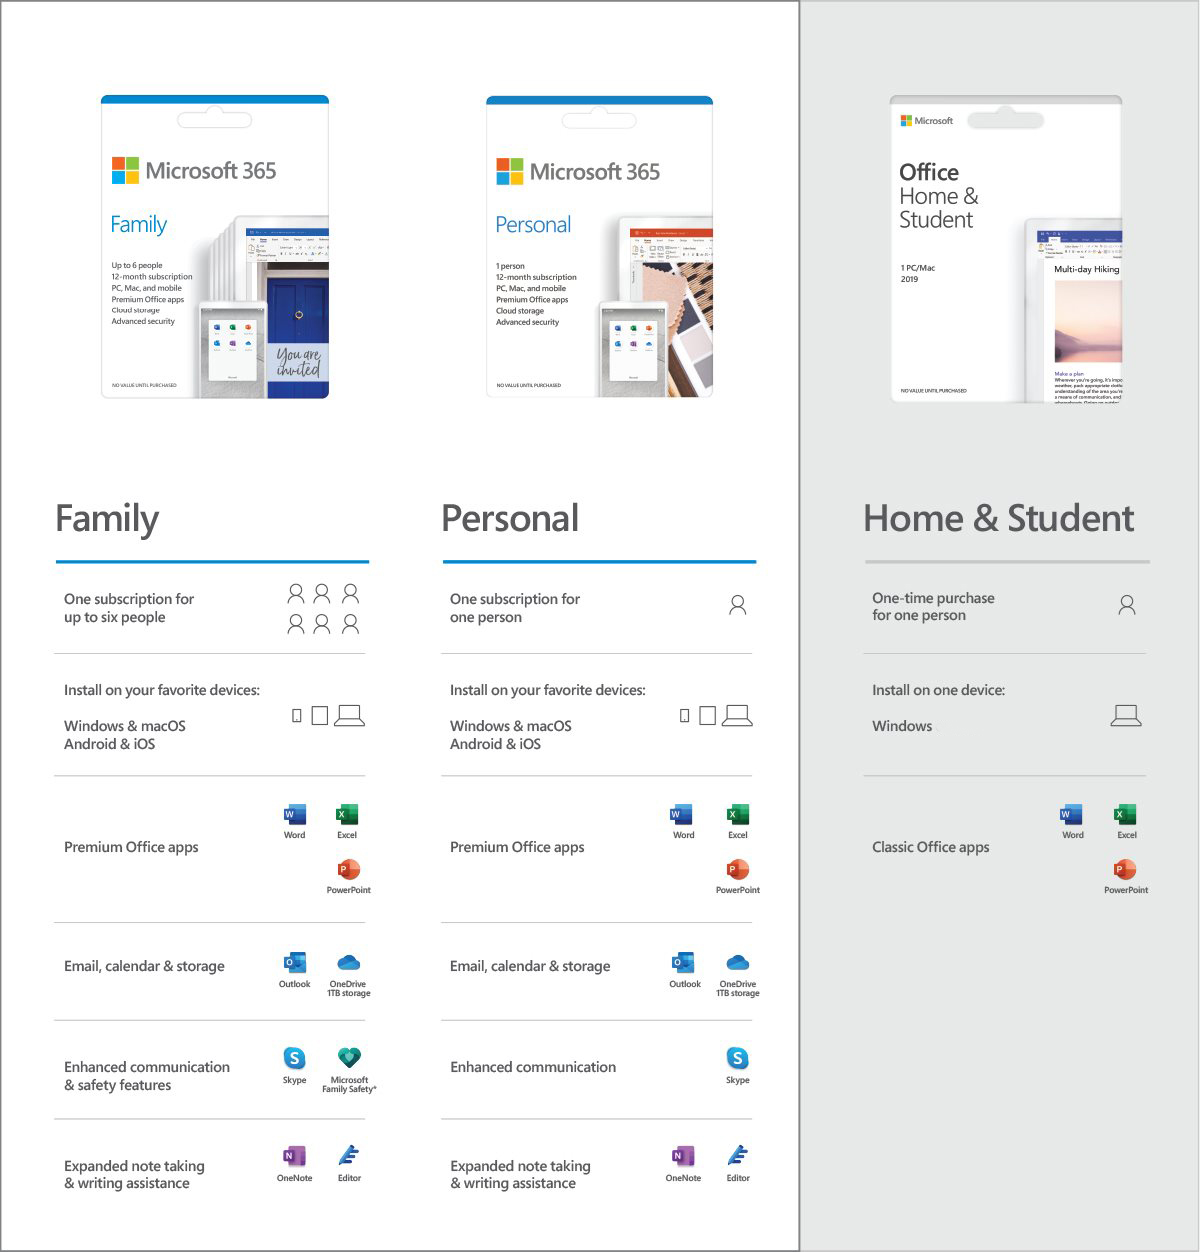 Microsoft Office Home & Student 2019 | One Time Purchase, 1 Device | Windows 10 PC Keycard